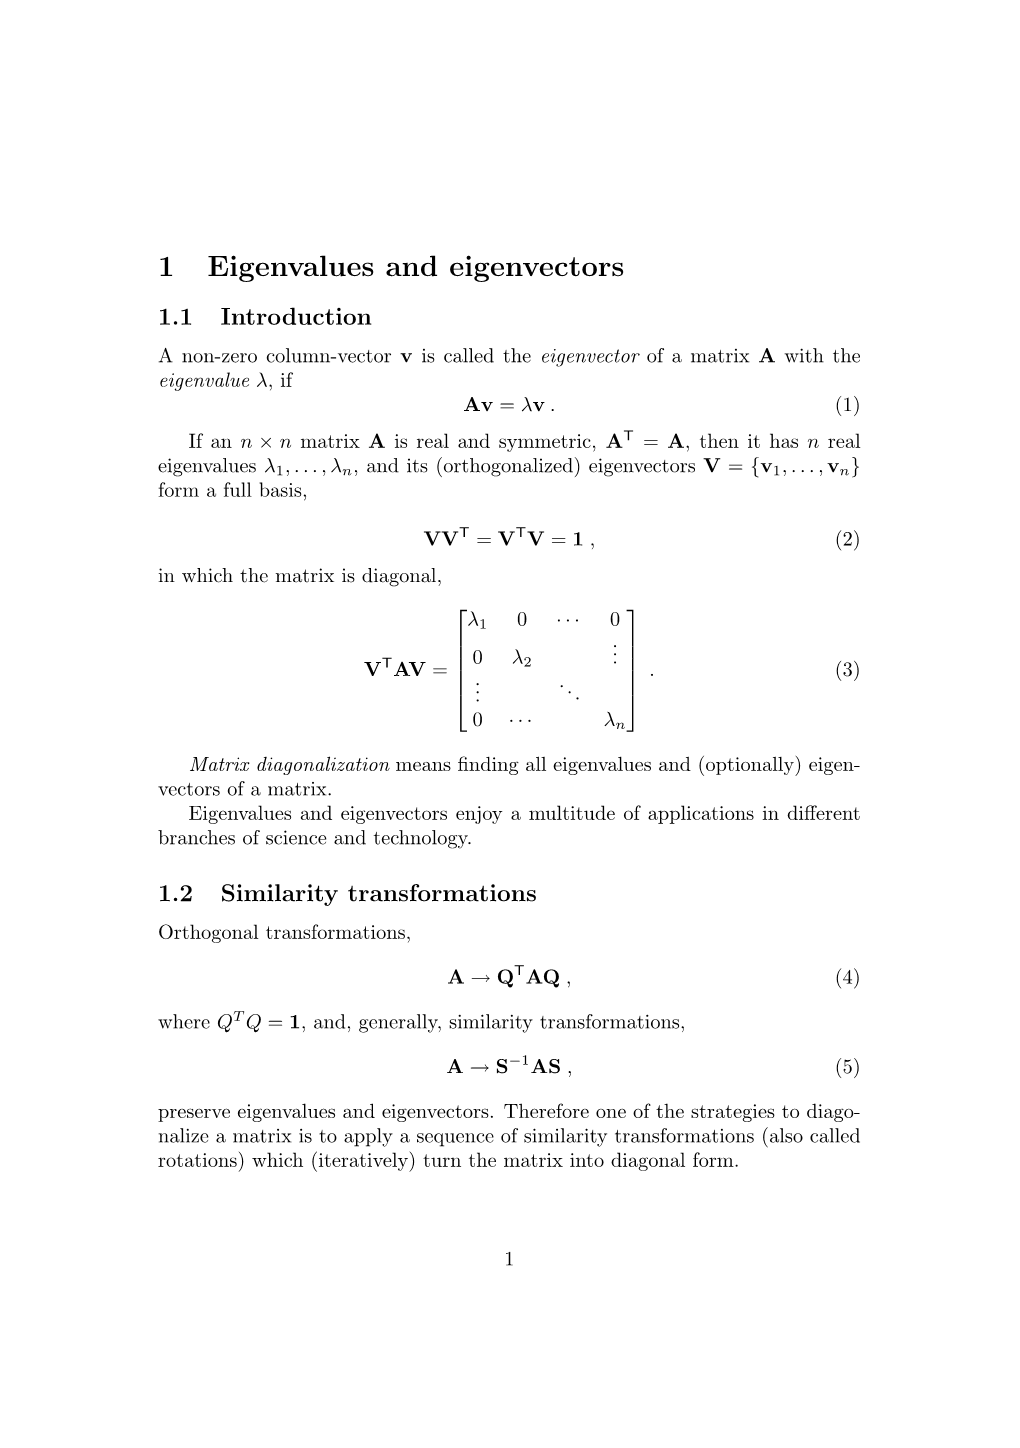 1 Eigenvalues and Eigenvectors 1.1 Introduction a Non-Zero Column-Vector V Is Called the Eigenvector of a Matrix a with the Eigenvalue Λ, If Av = Λv